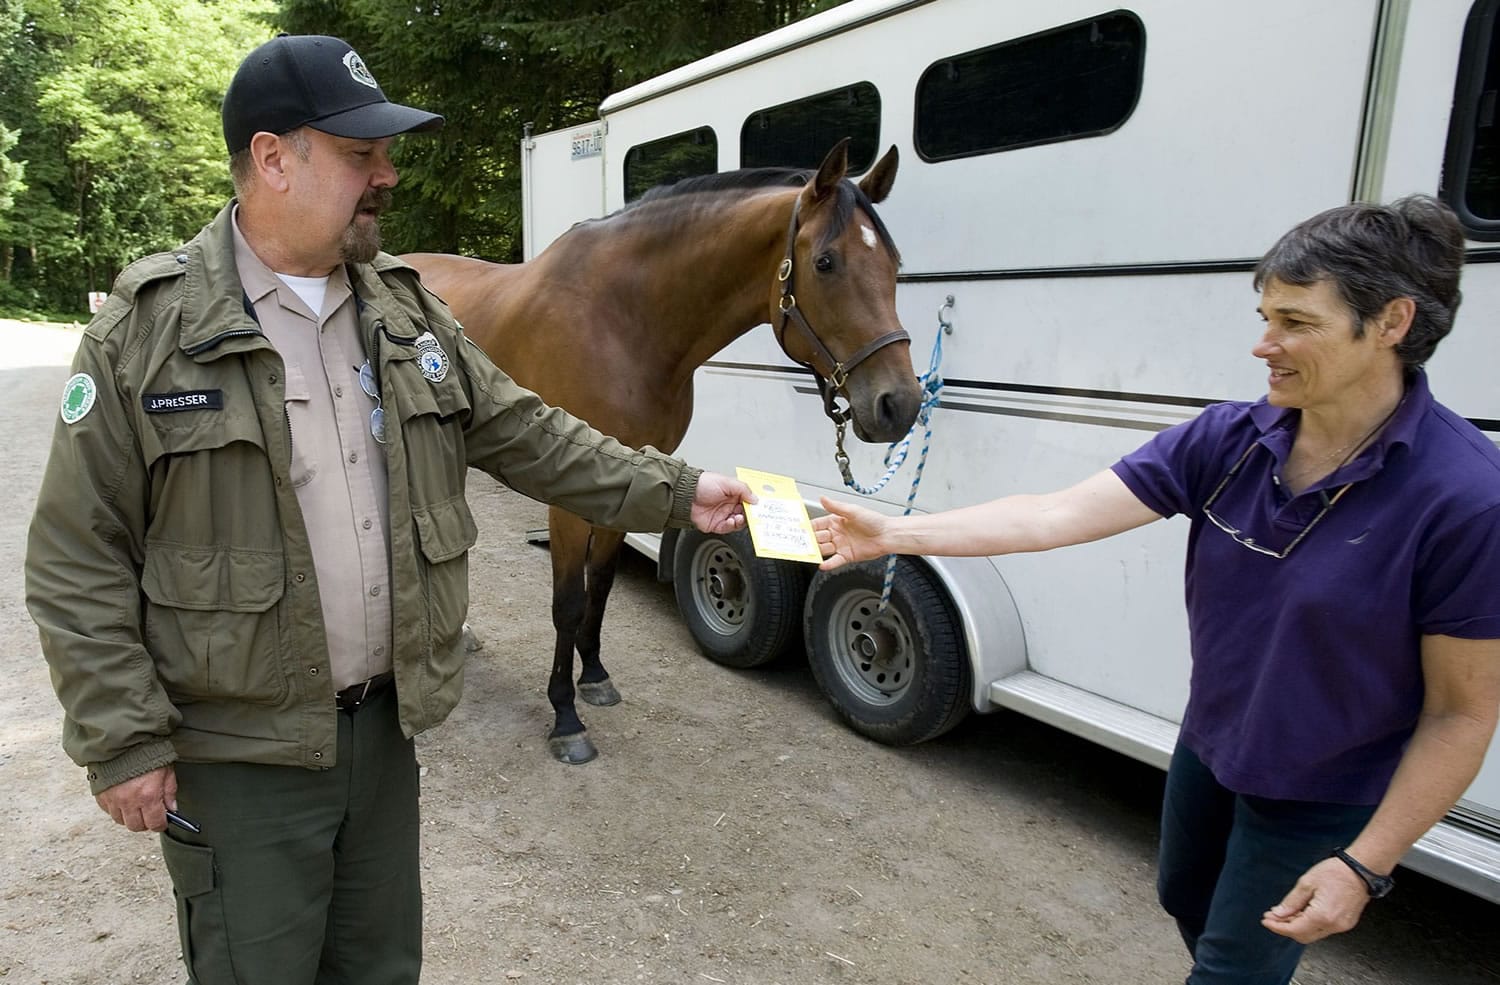 Battle Ground Lake State Park manager Jim Presser issues an annual Discover Pass to Ridgefield's Aimee Witherspoon, shown with her horse &quot;Worth the Wait.&quot; The Discover Pass, for day use, costs $30 and helps support the state park system.